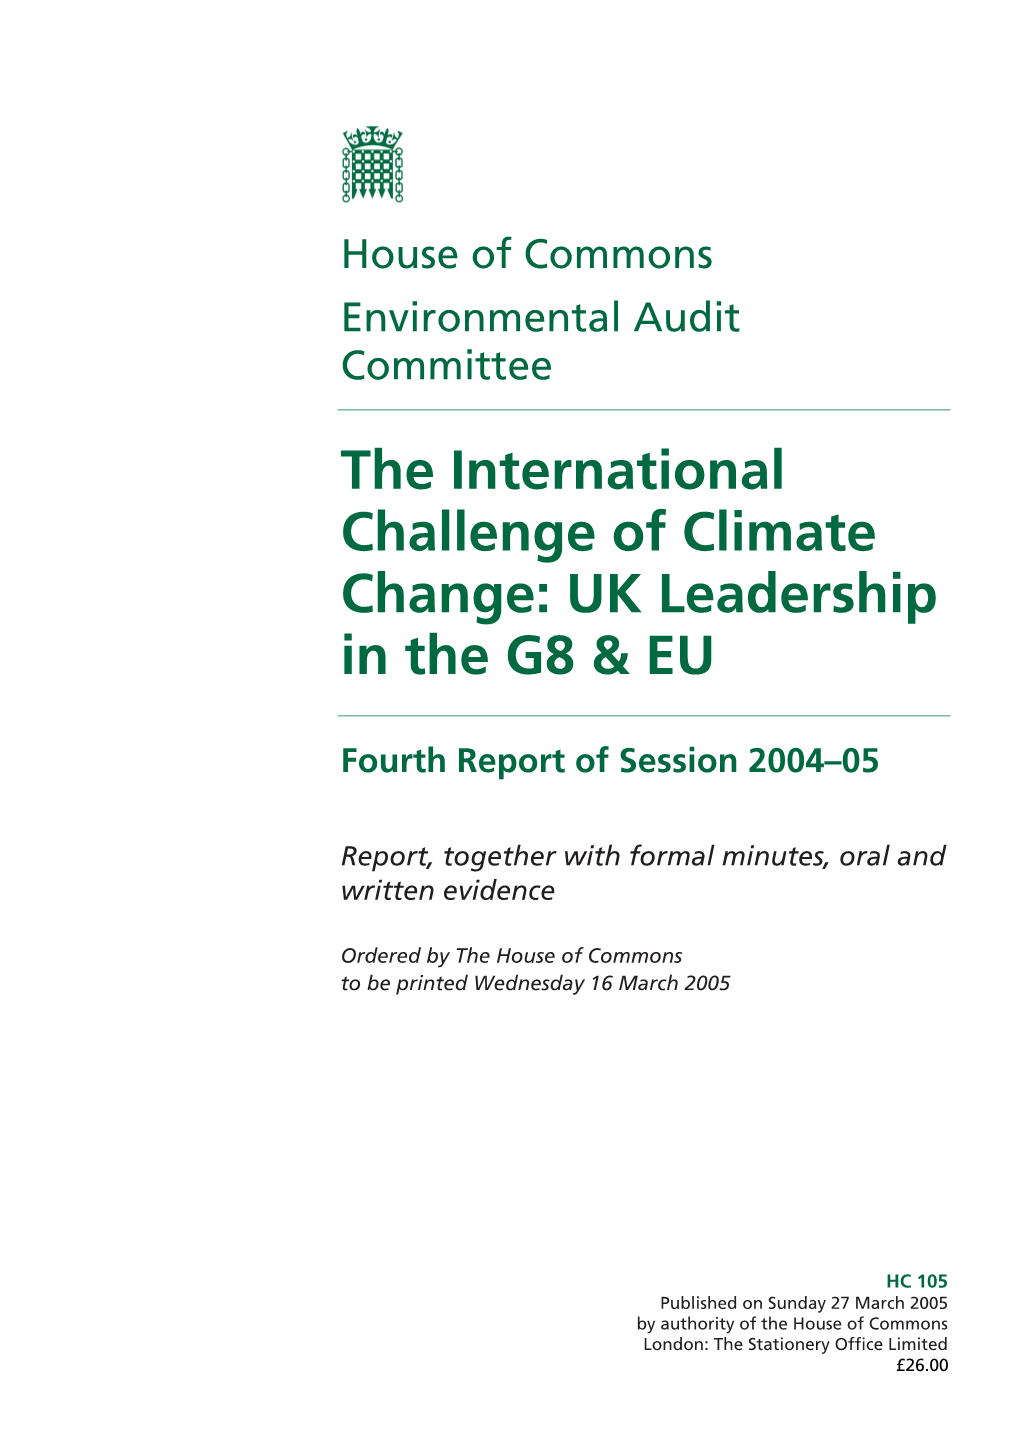 The International Challenge of Climate Change: UK Leadership in the G8 & EU